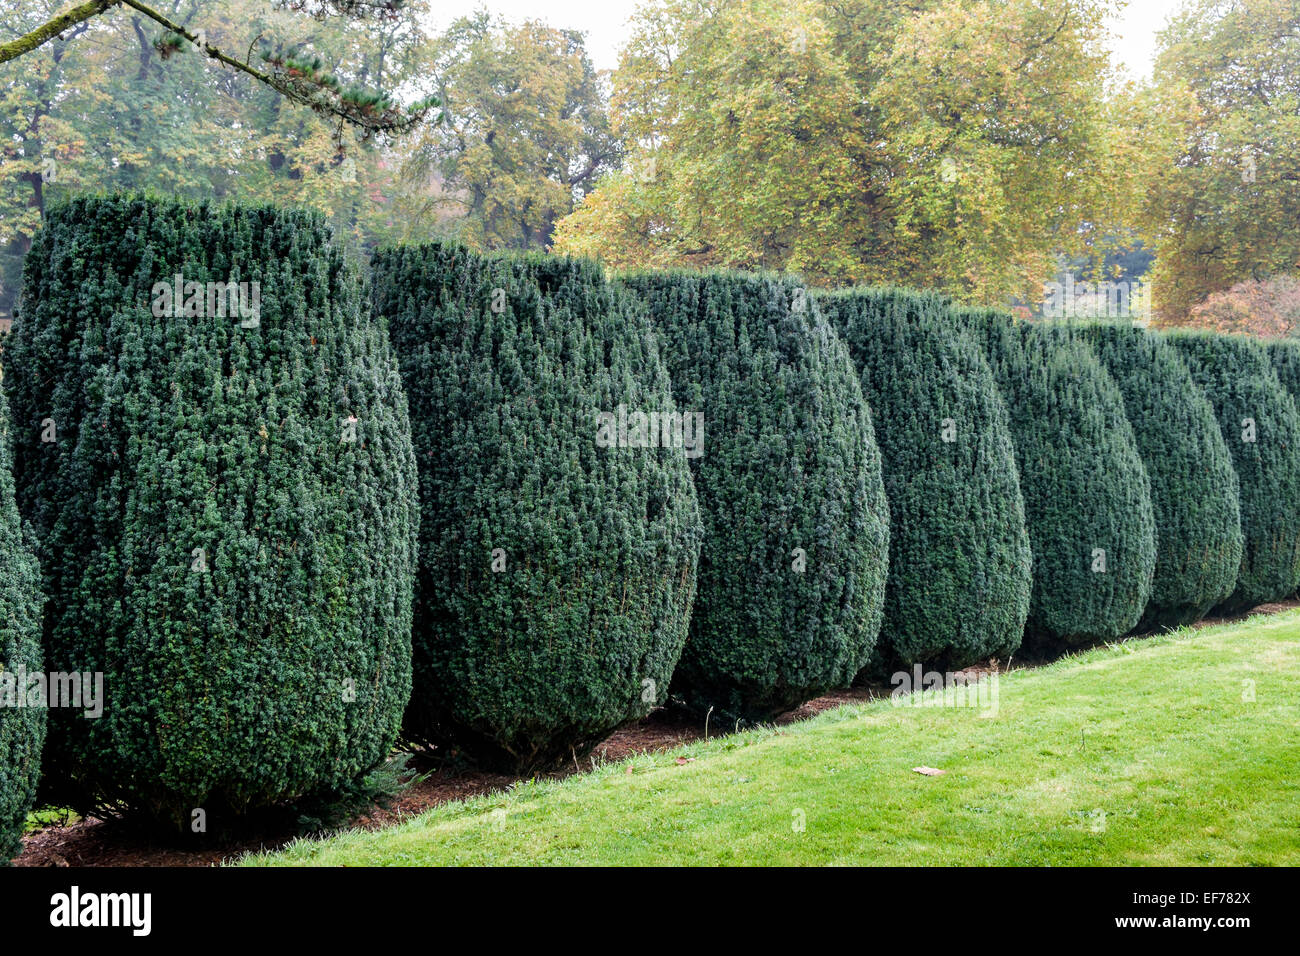 Row of clipped Yew trees in Autumn Stock Photo